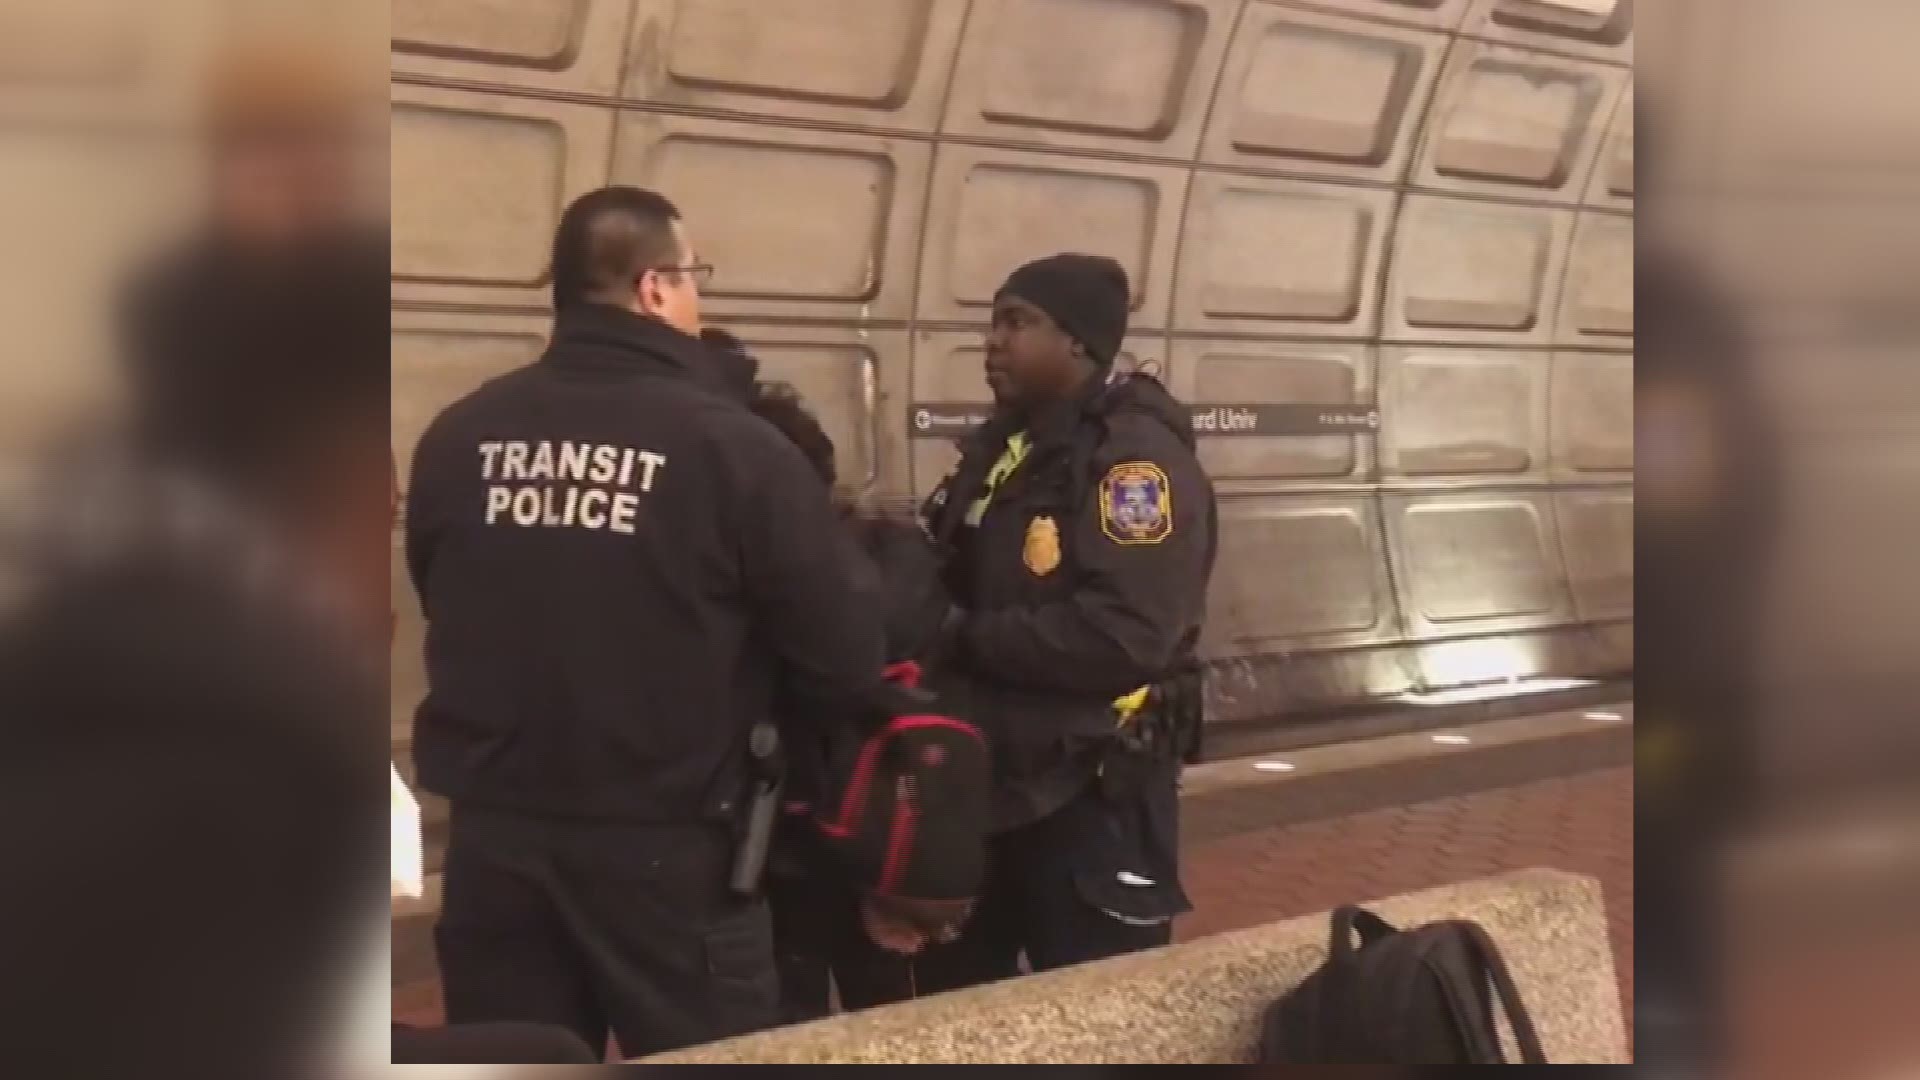 Metro riders sent out tweets of concern Thursday after some said they witnessed Metro Transit Police officers putting a 13-year-old boy in handcuffs.